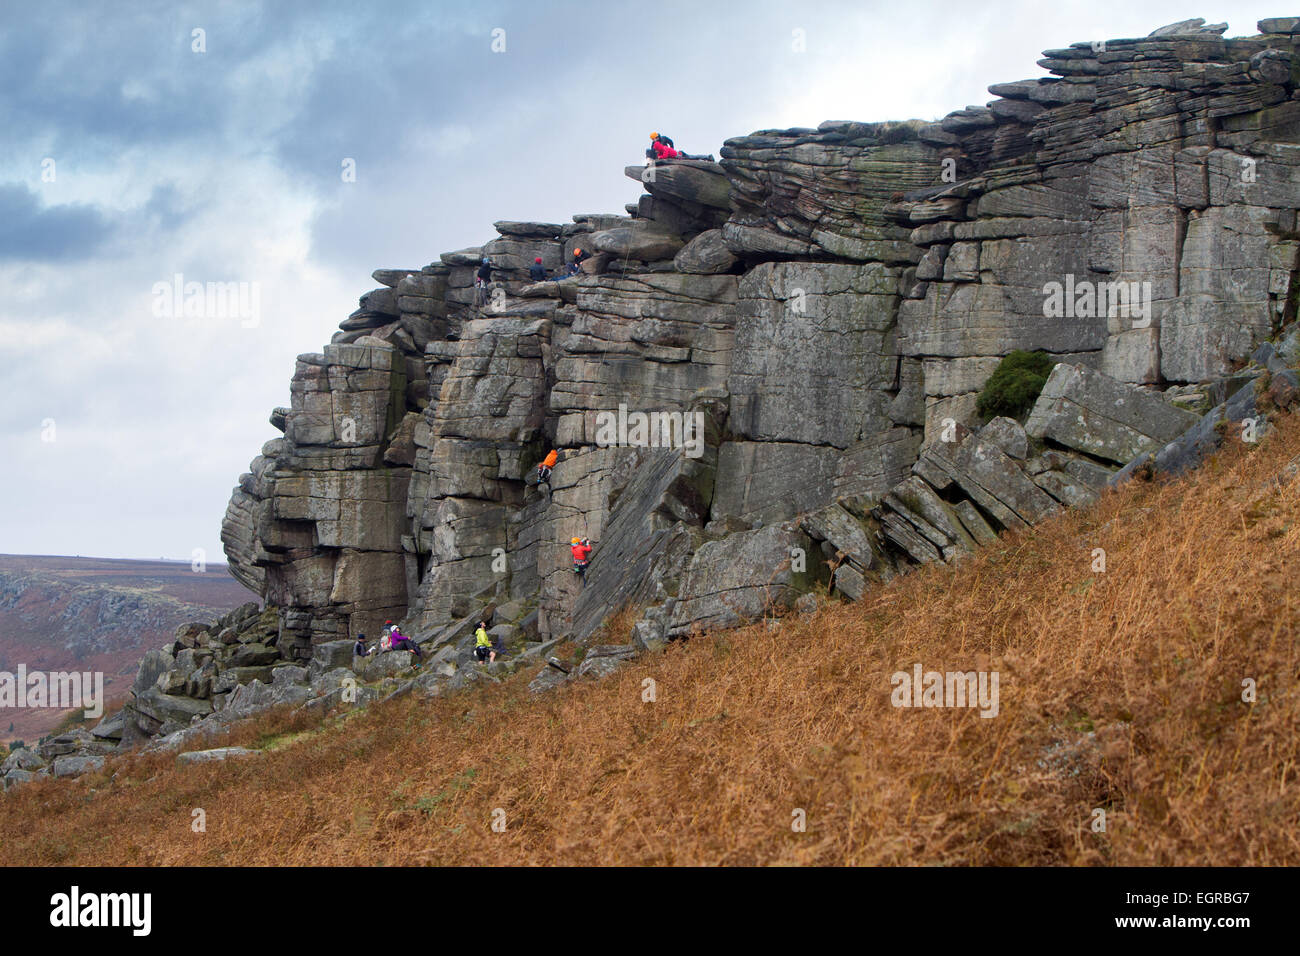 Climbers on Stanage Edge in the Peak District Stock Photo